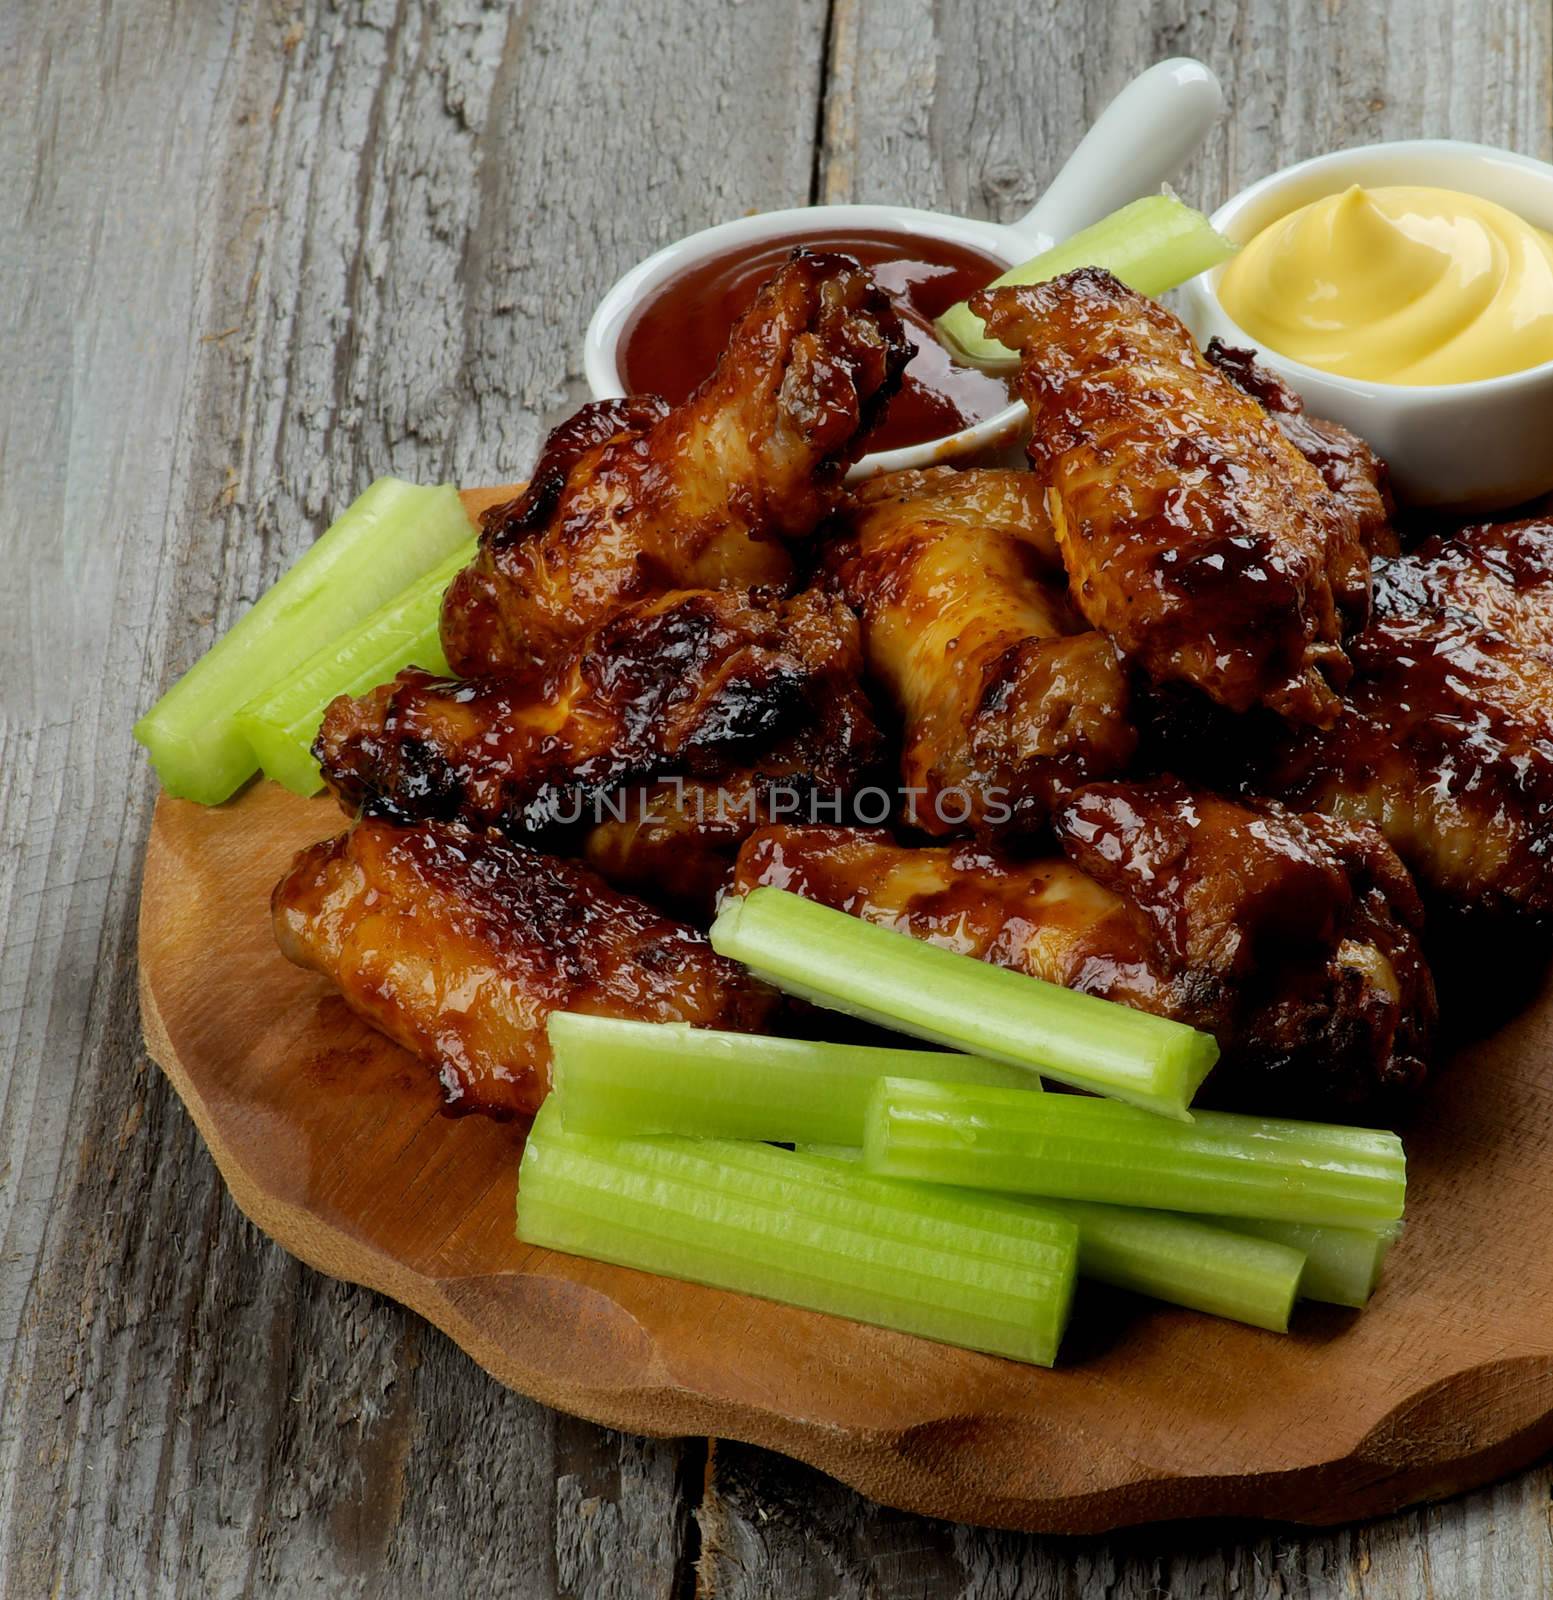 Delicious Chicken Legs and Wings Barbecue with Ketchup and Cheese Sauces and Celery Sticks on Wooden Plate closeup on Rustic Wooden background